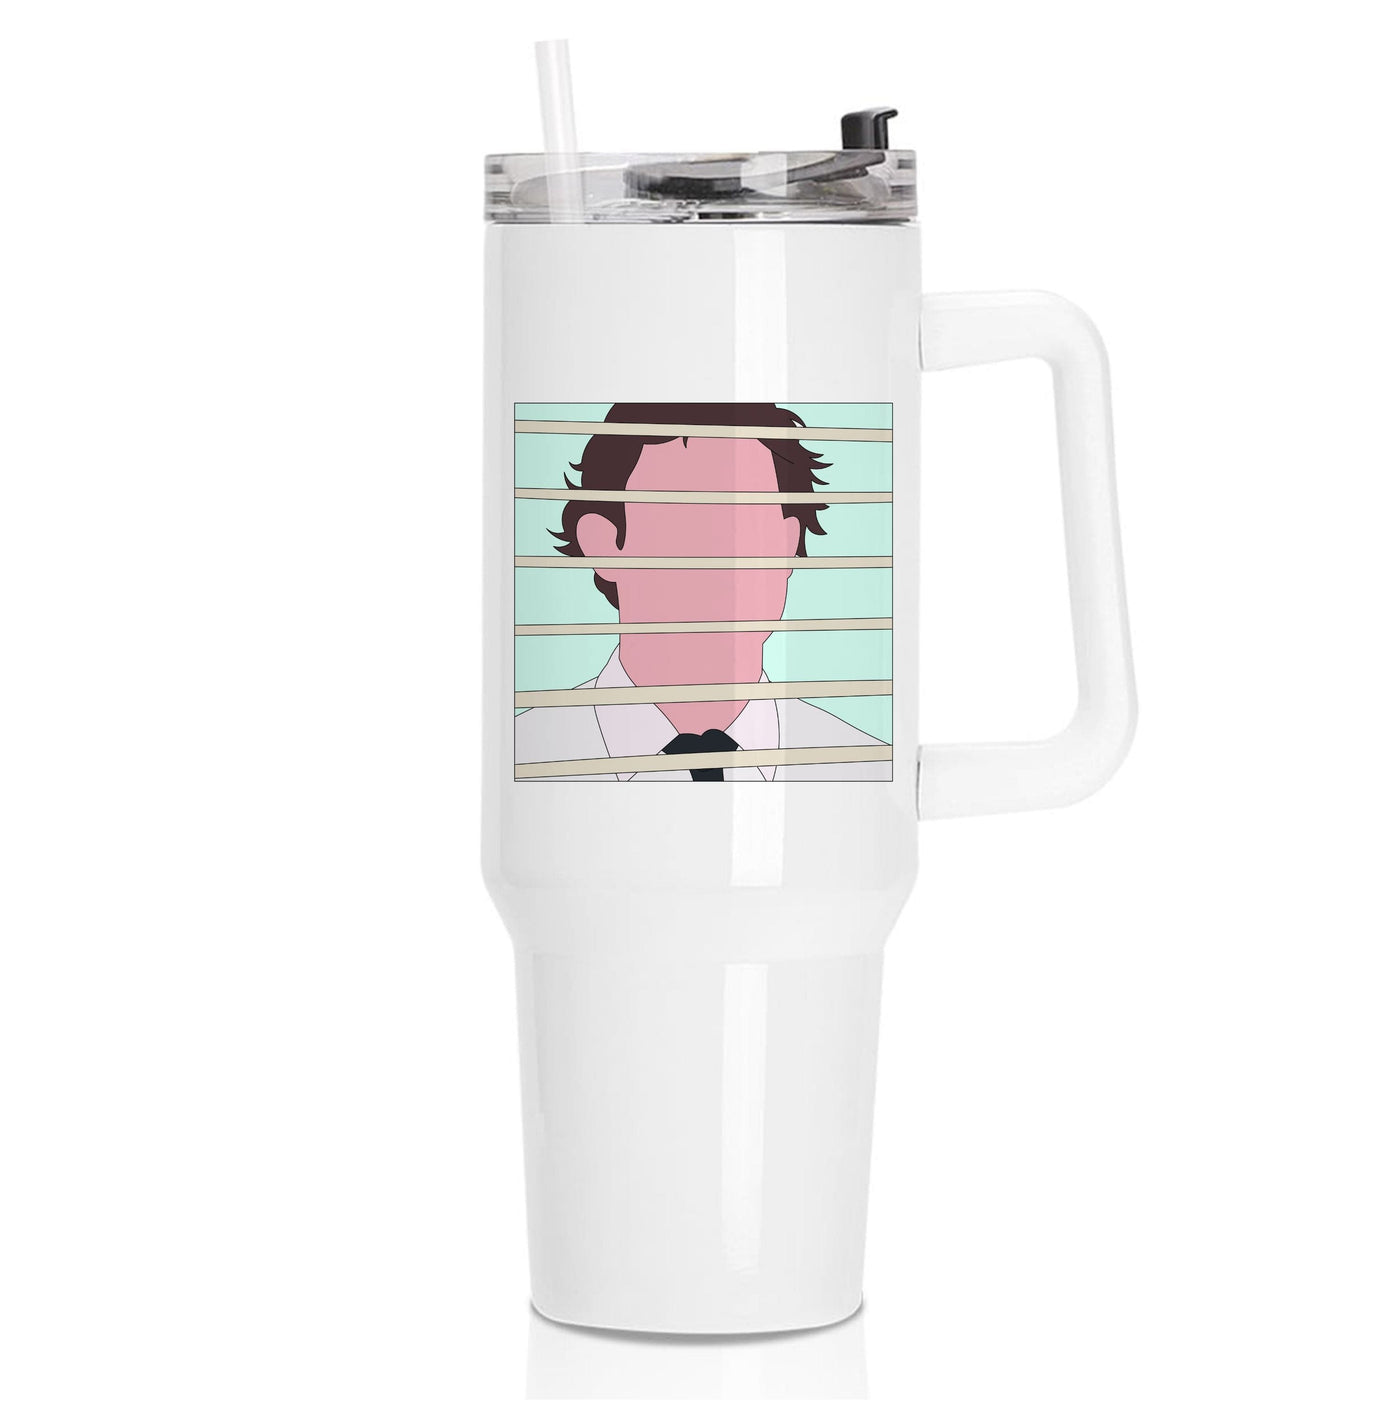 Jim Through The Blinds - The Office Tumbler